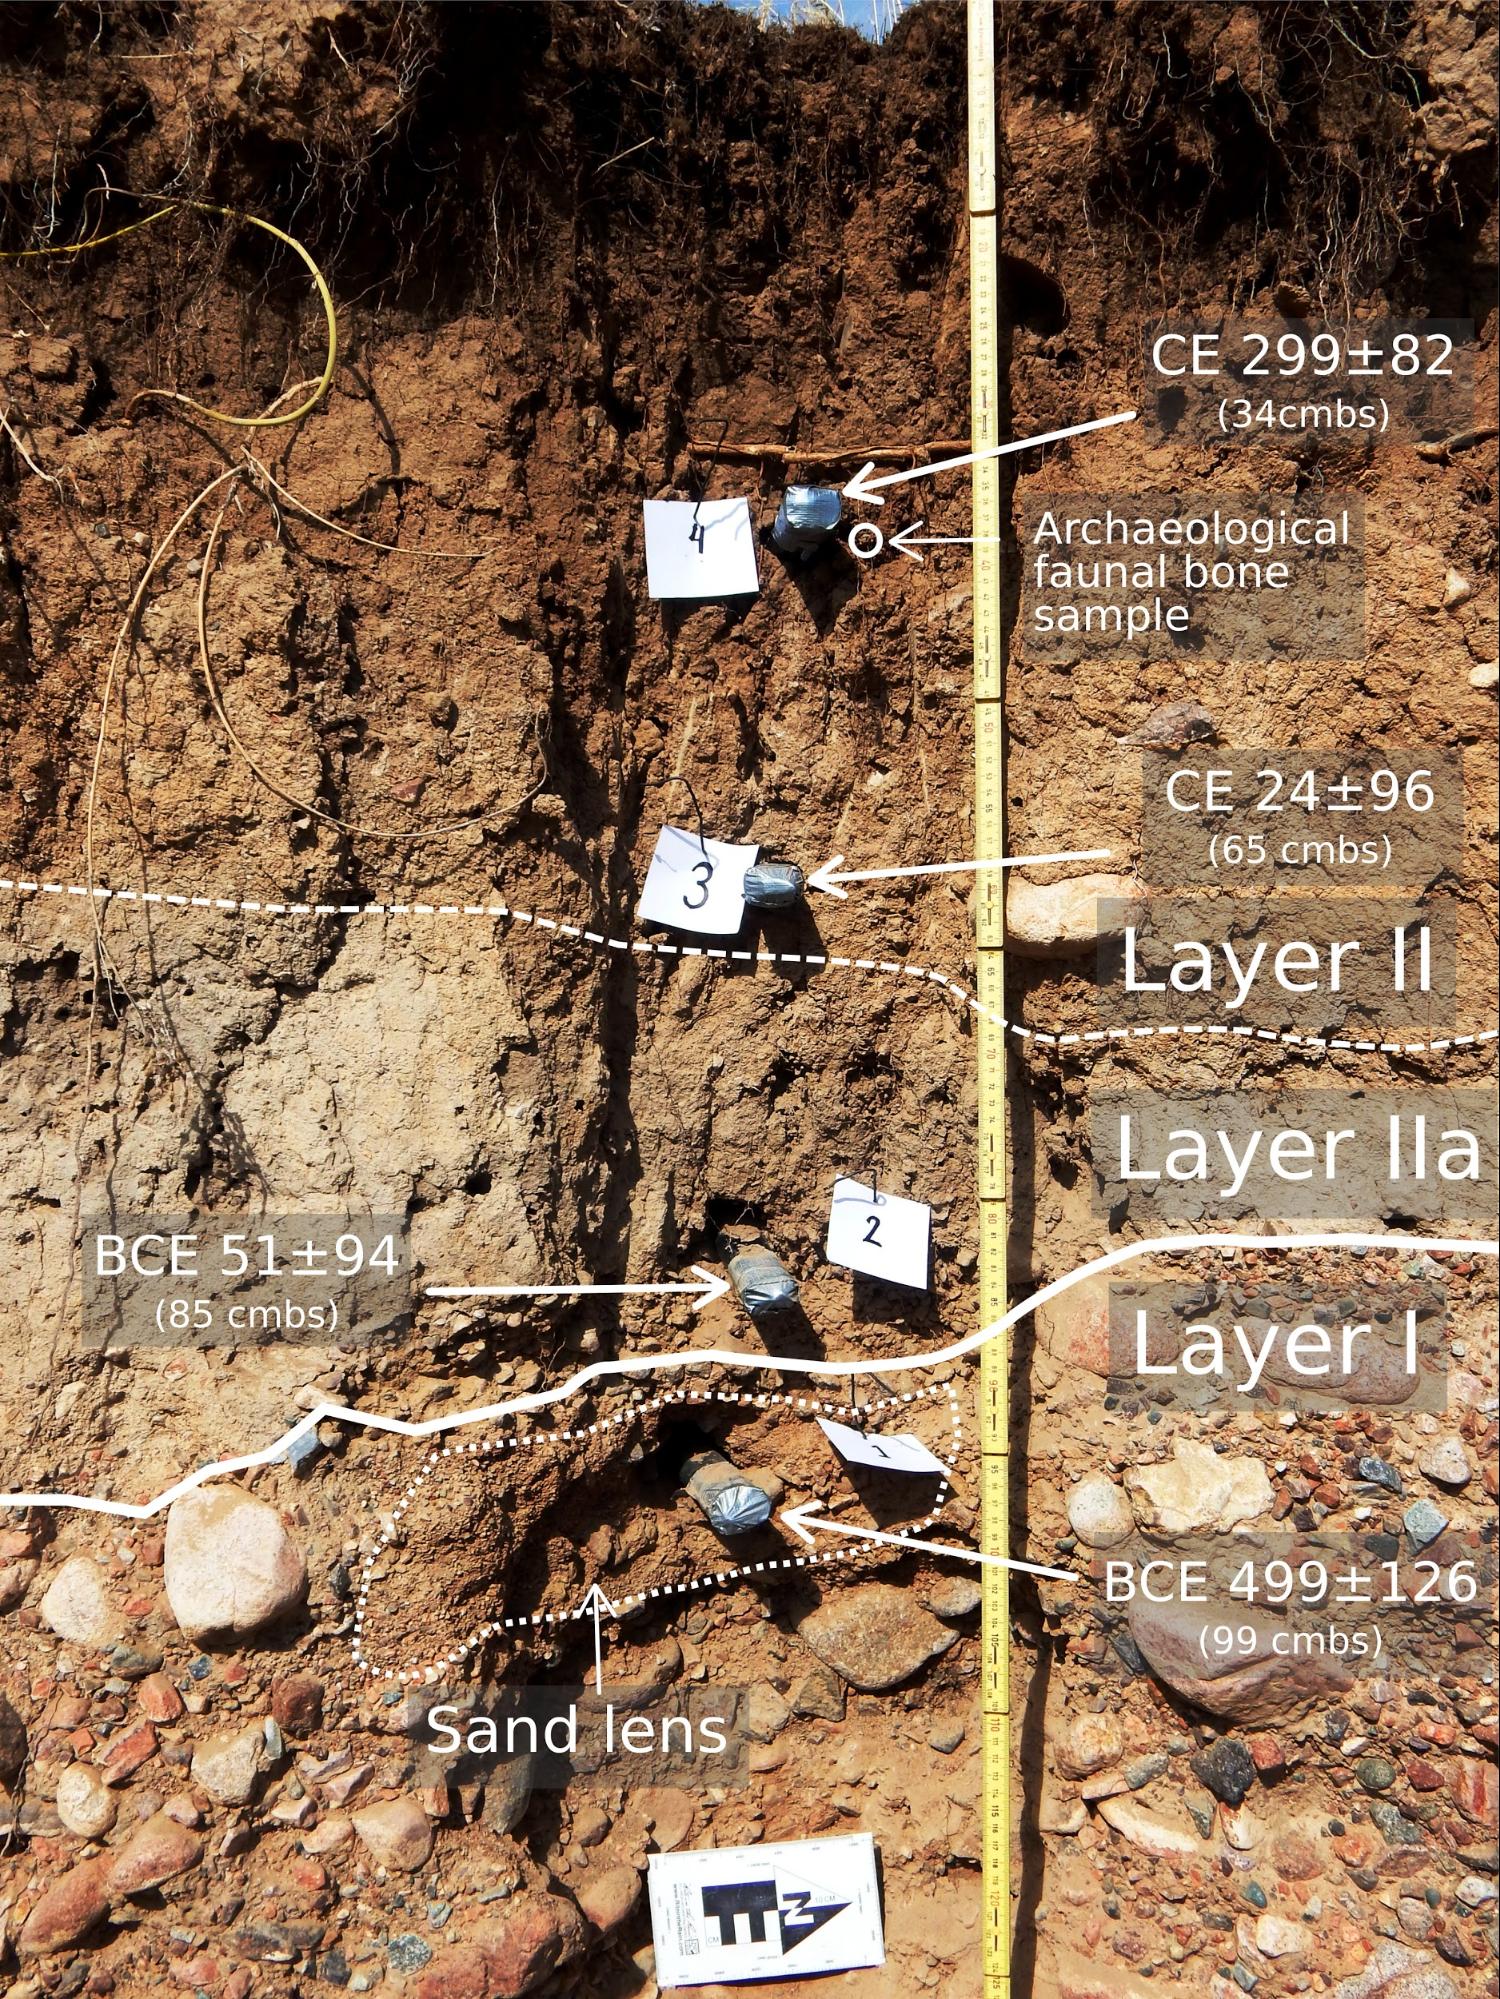 OSL dates overlain on the stratigraphy of the 2015 pilot profile reveal a prominent unconformity after 499 BCE and slowing sedimentation rates in the overlaying fine-grained deposit.